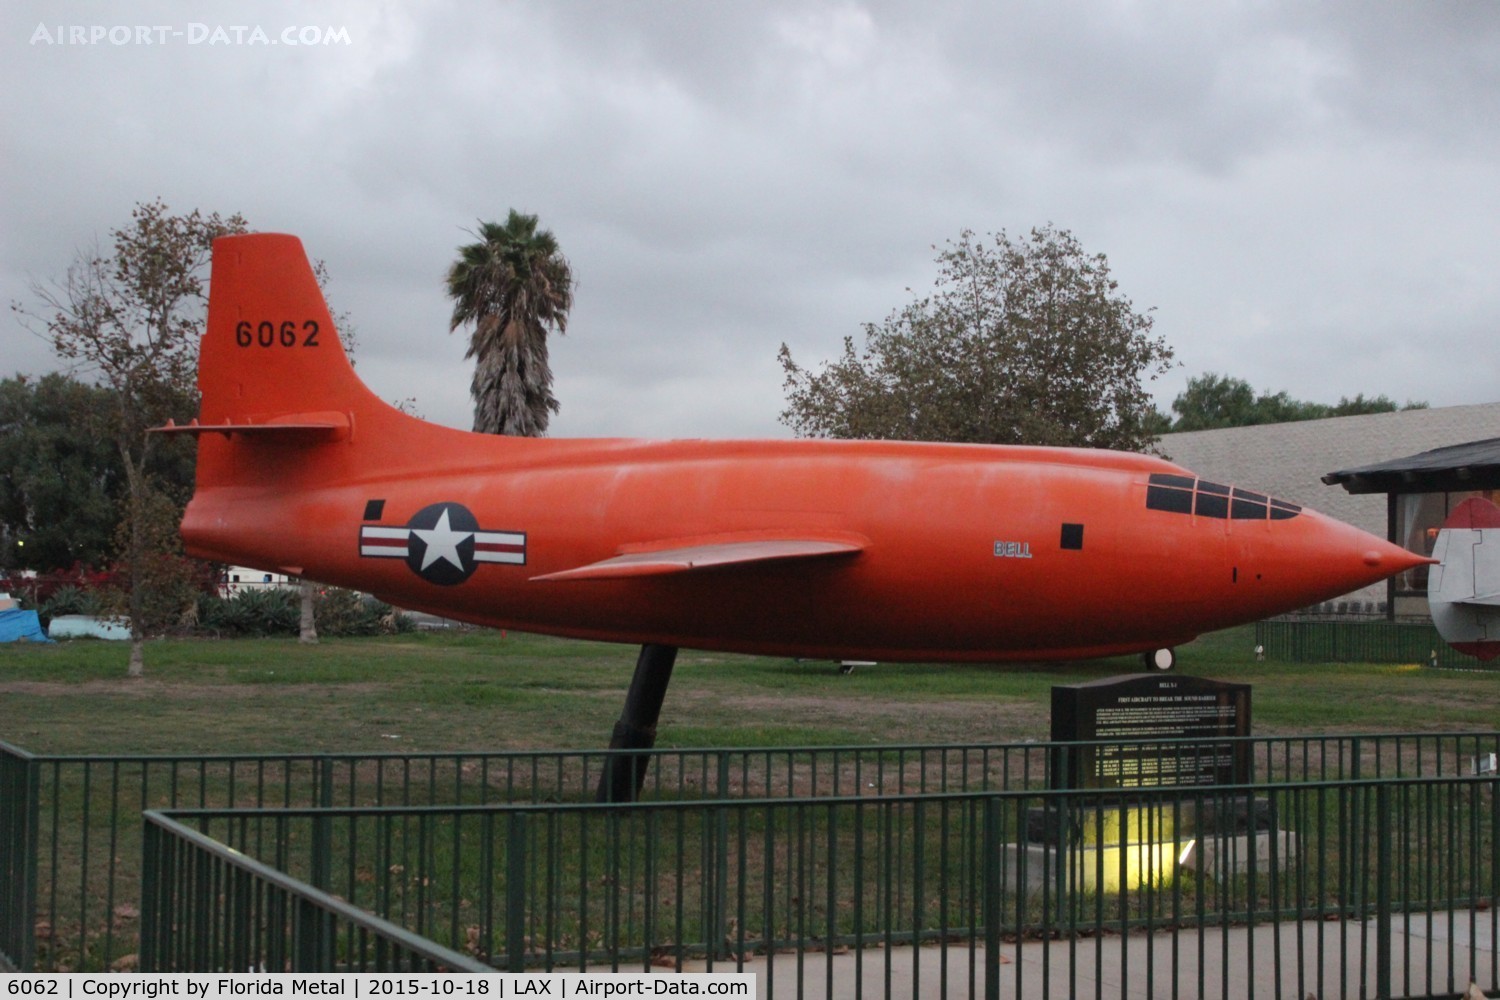 6062, Bell X-1 Replica C/N None, This is a fiberglass replica of 46-0062, Glamorous Glennis that is at the Smithsonian.  This replica is at the Proud Bird Restaurant near LAX